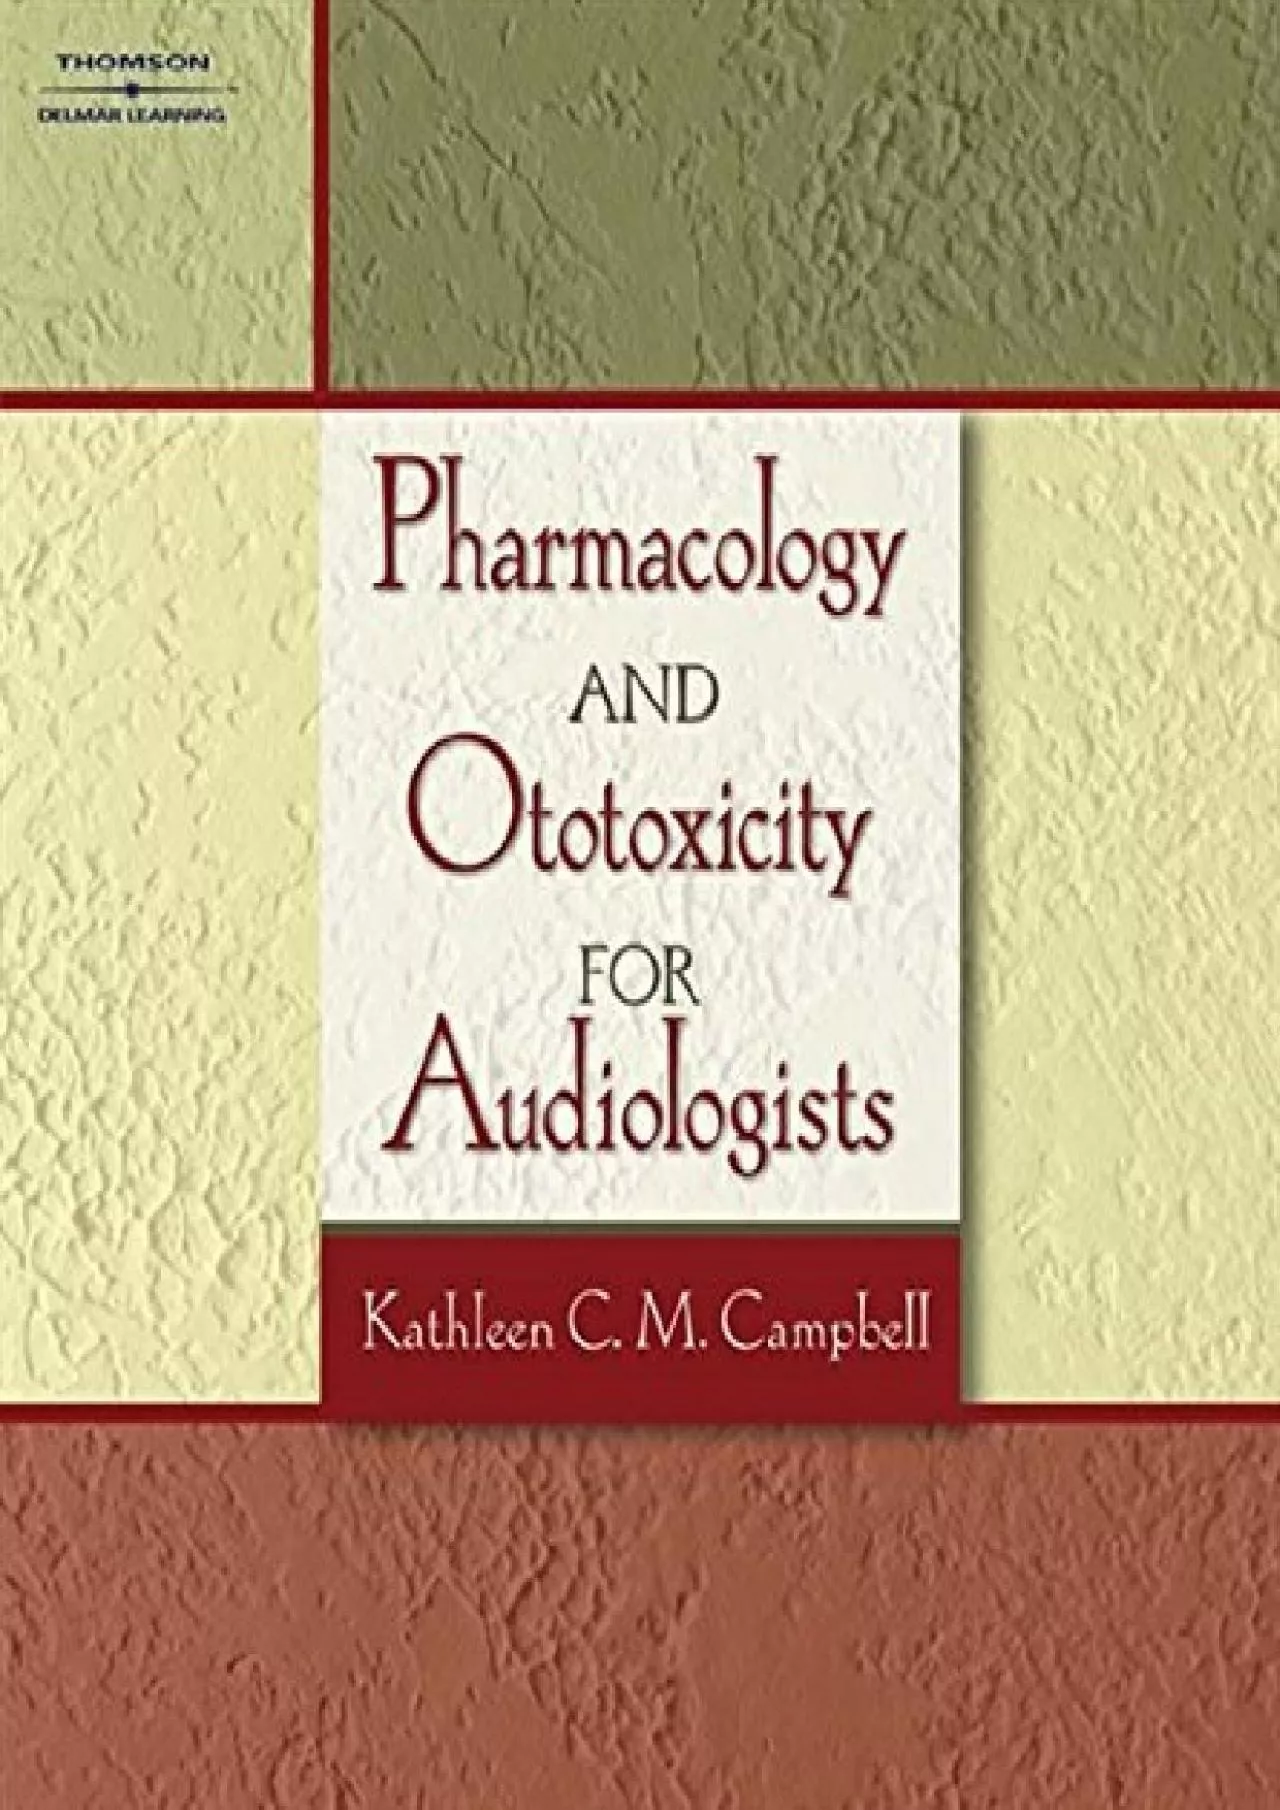 (DOWNLOAD)-Pharmacology and Ototoxicity for Audiologists